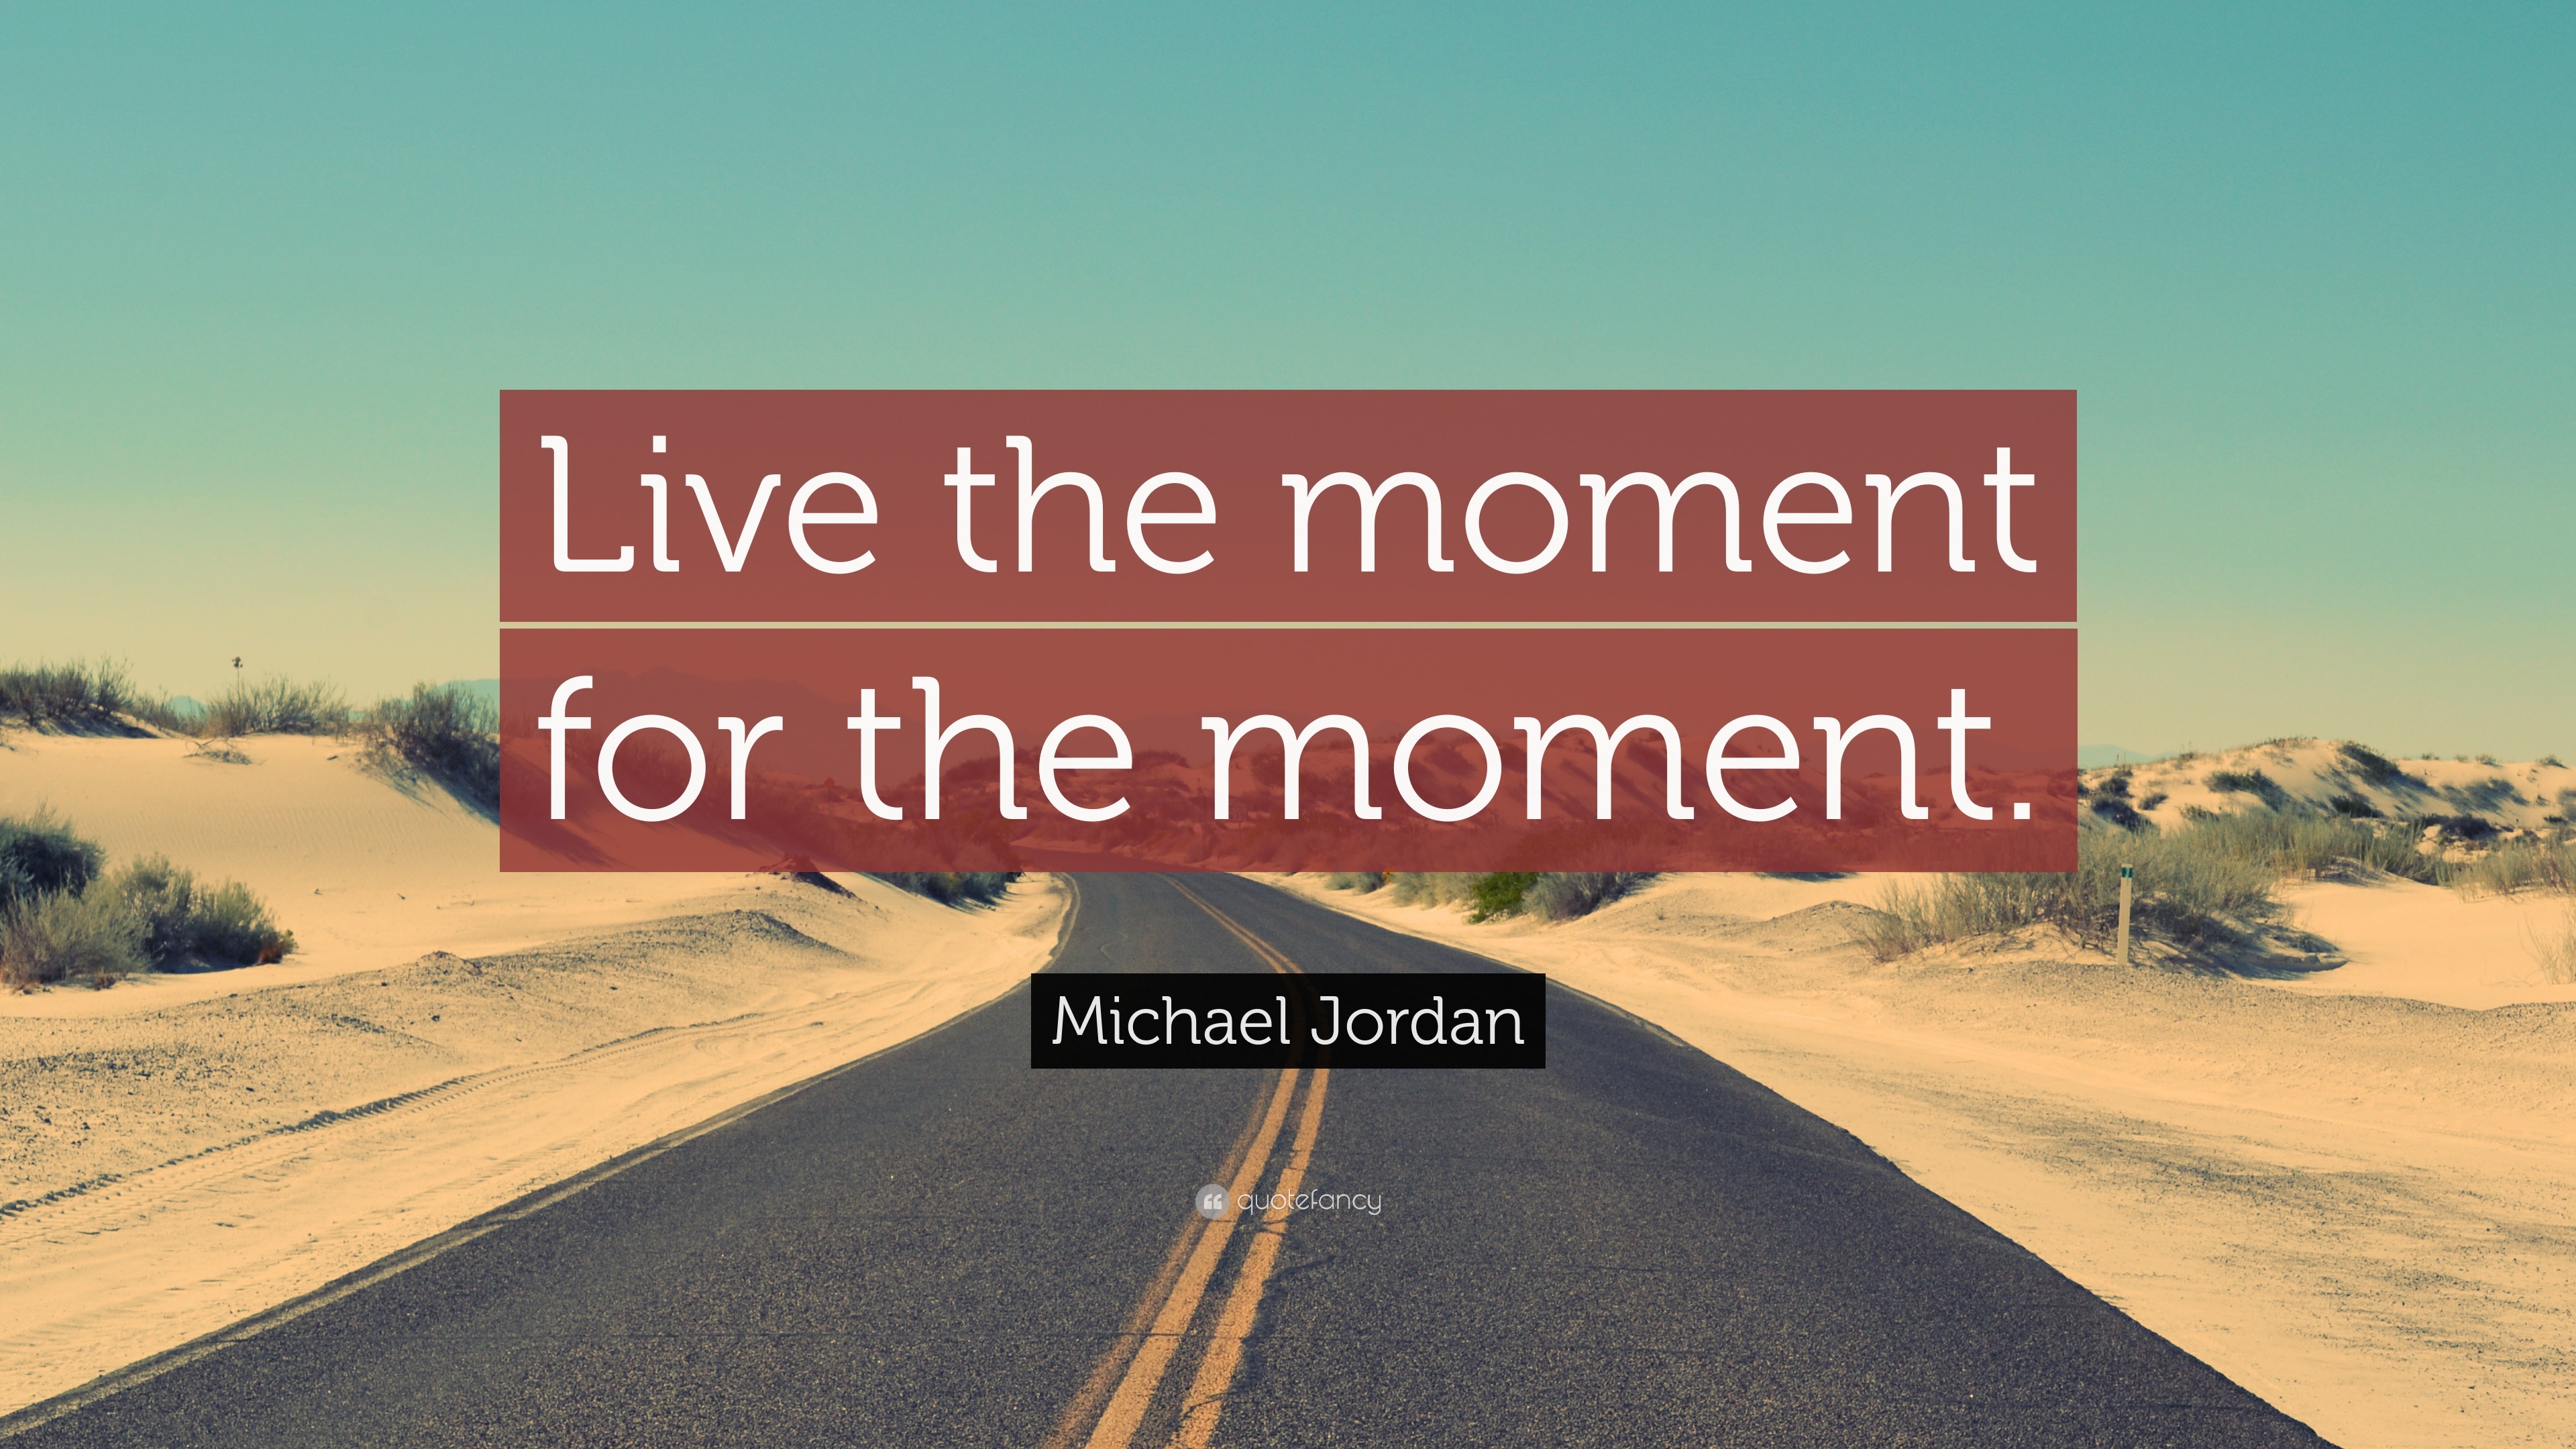 Michael Jordan Quote “Live the moment for the moment